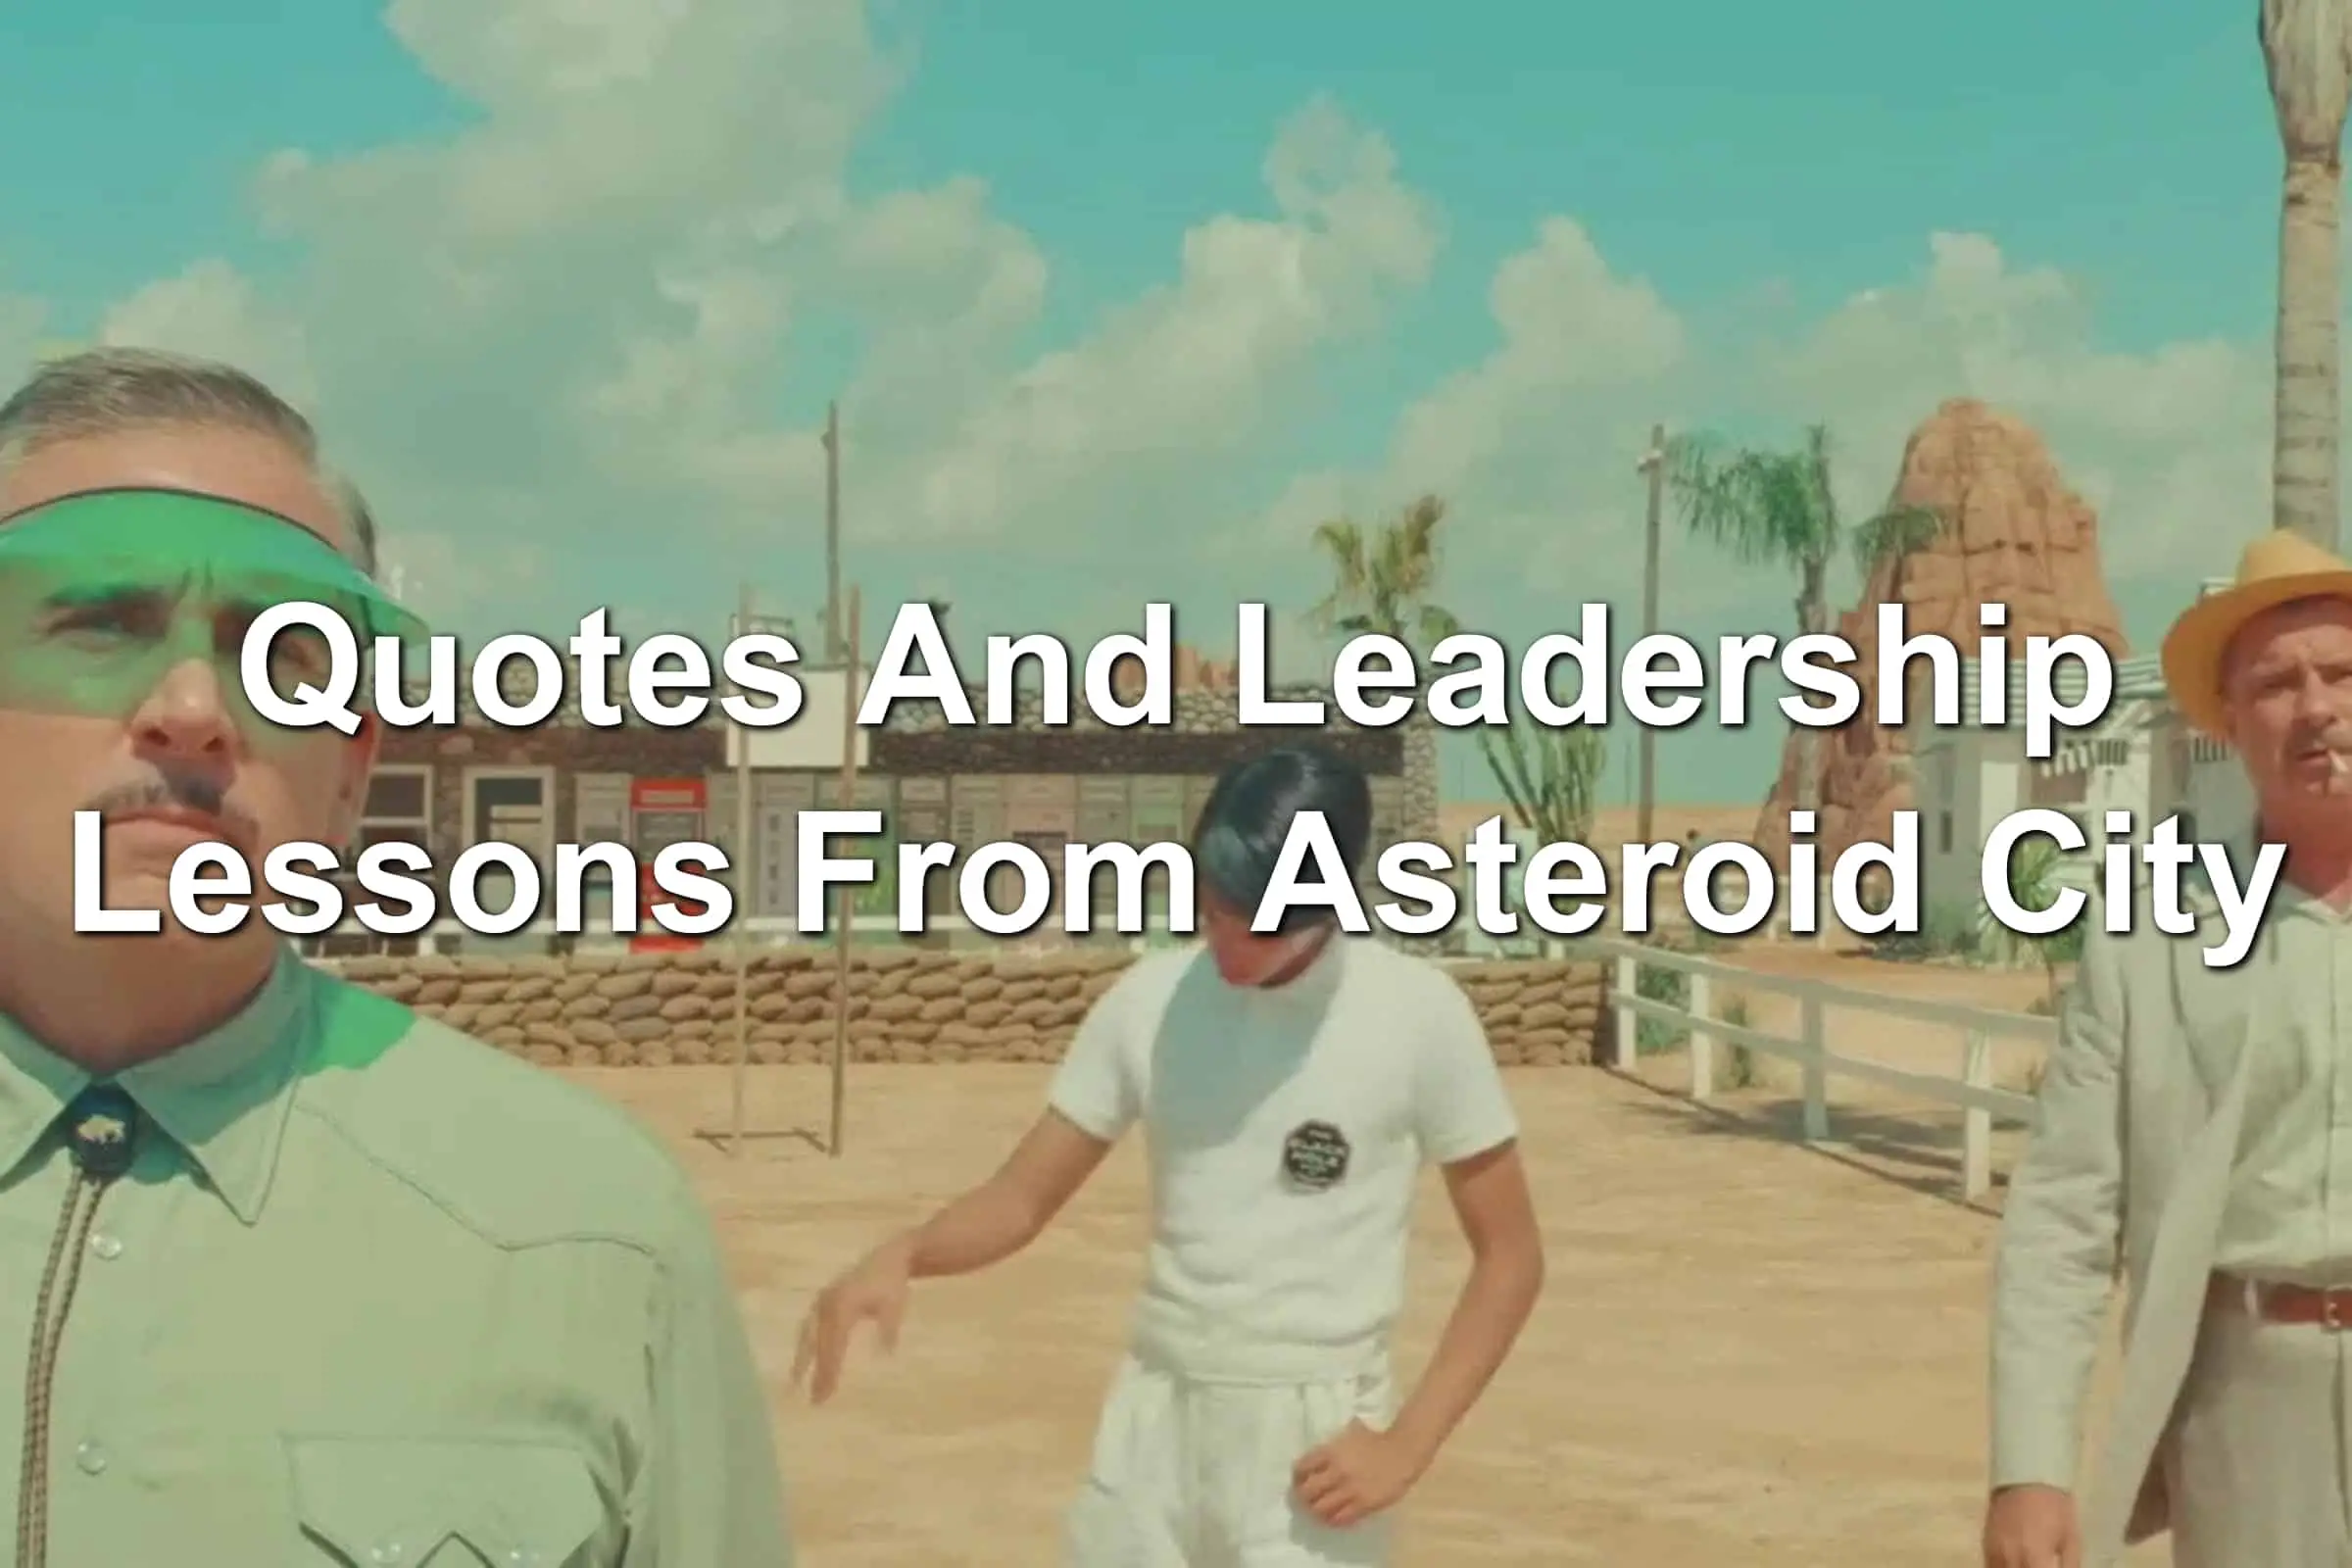 Steve Carell and Tom Hanks in Asteroid City